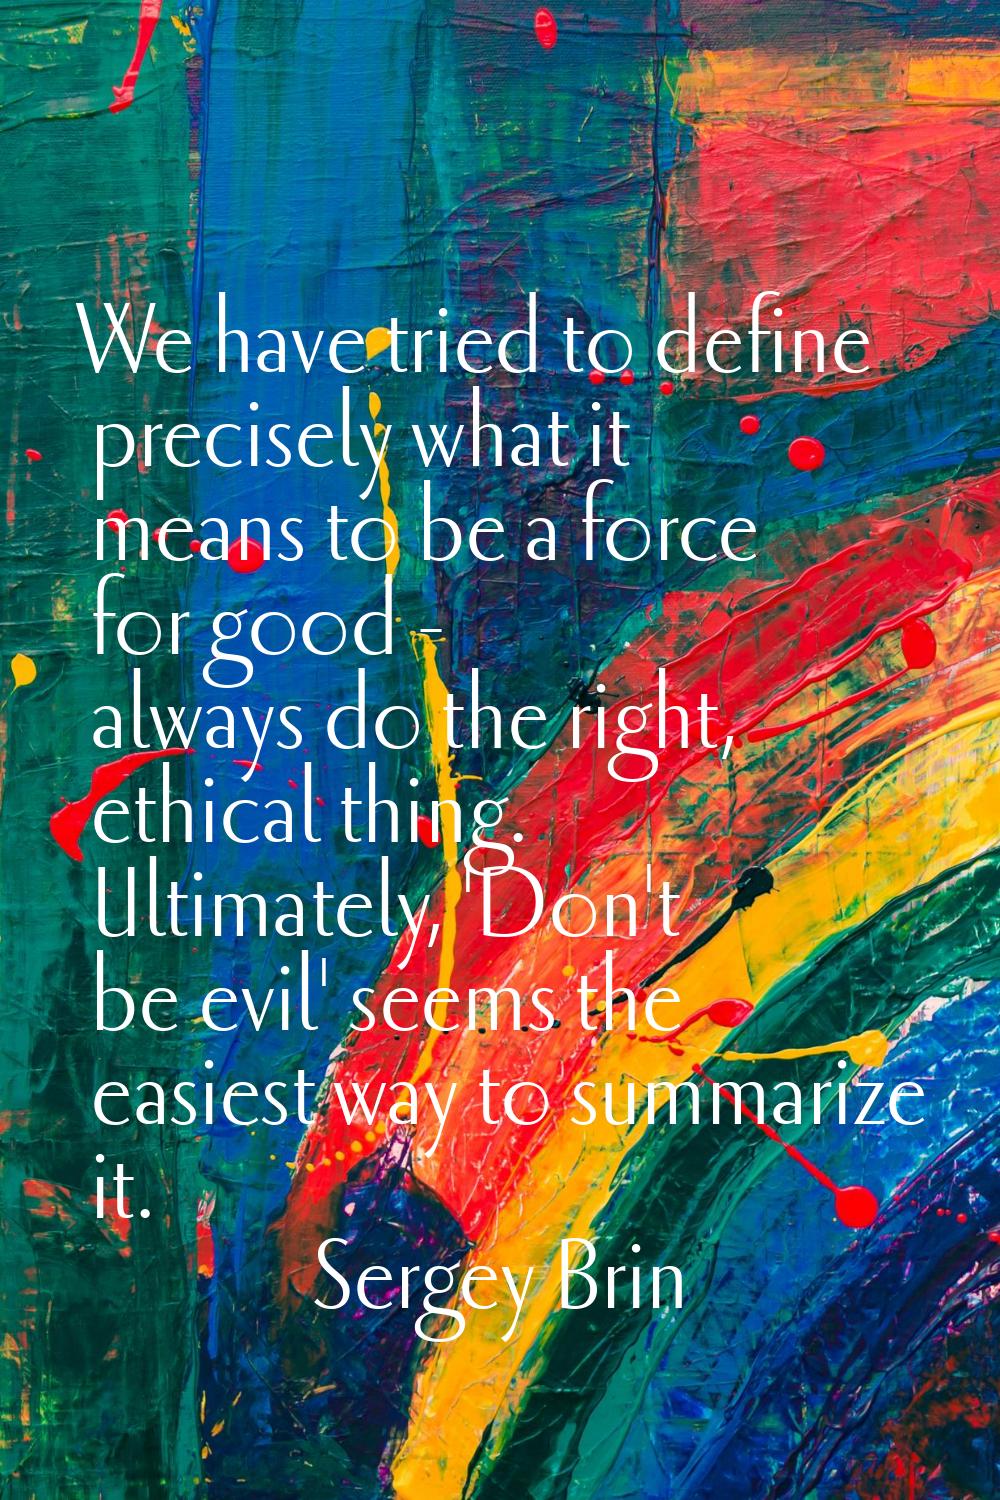 We have tried to define precisely what it means to be a force for good - always do the right, ethic